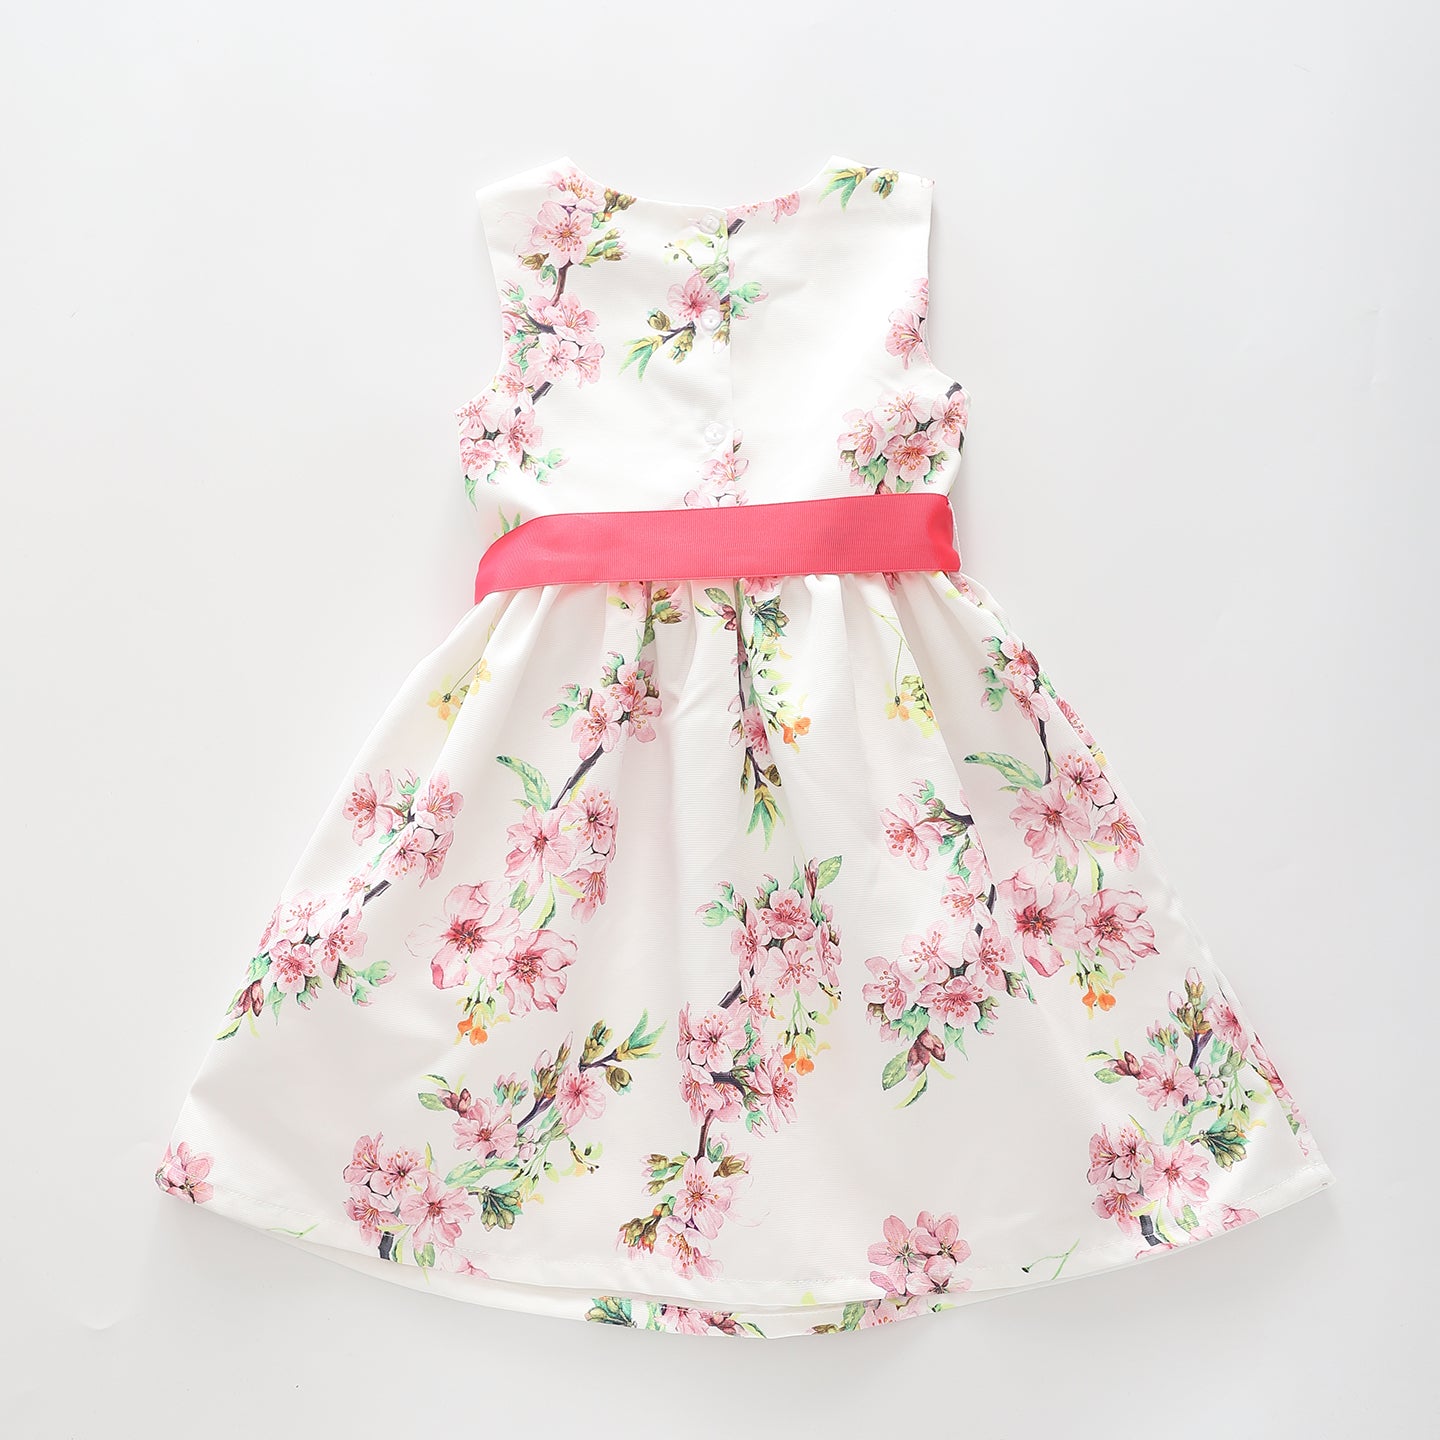 Girl's White and Pink Cherry Blossom Party Dress